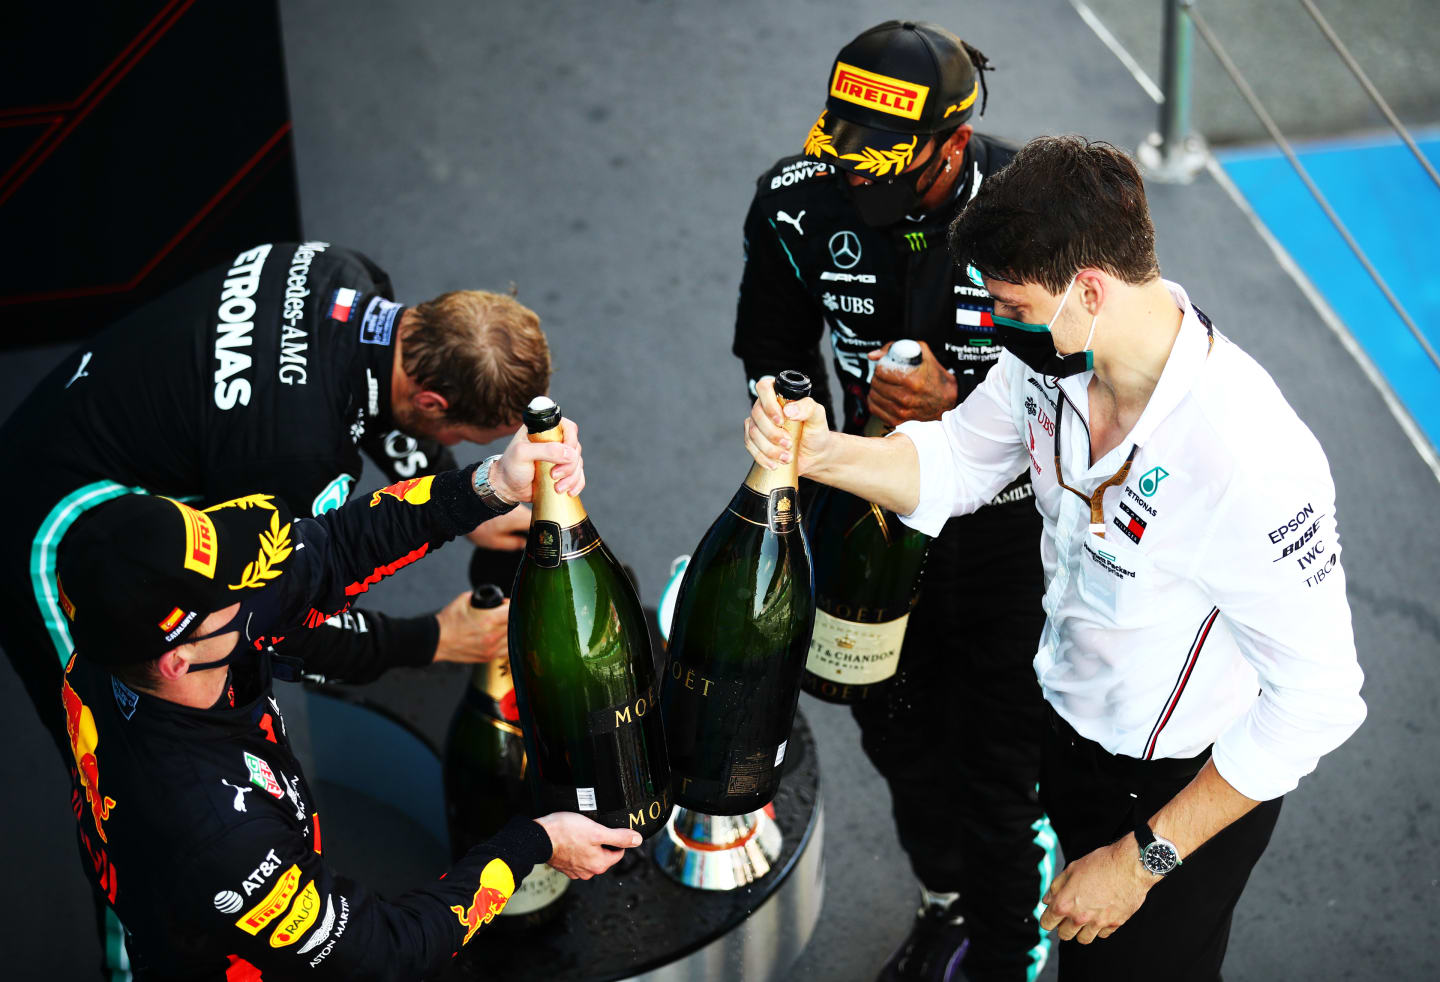 BARCELONA, SPAIN - AUGUST 16: Race winner Lewis Hamilton of Great Britain and Mercedes GP,  second placed Max Verstappen of Netherlands and Red Bull Racing and third placed Valtteri Bottas of Finland and Mercedes GP celebrate on the podium during the F1 Grand Prix of Spain at Circuit de Barcelona-Catalunya on August 16, 2020 in Barcelona, Spain. (Photo by Bryn Lennon/Getty Images)